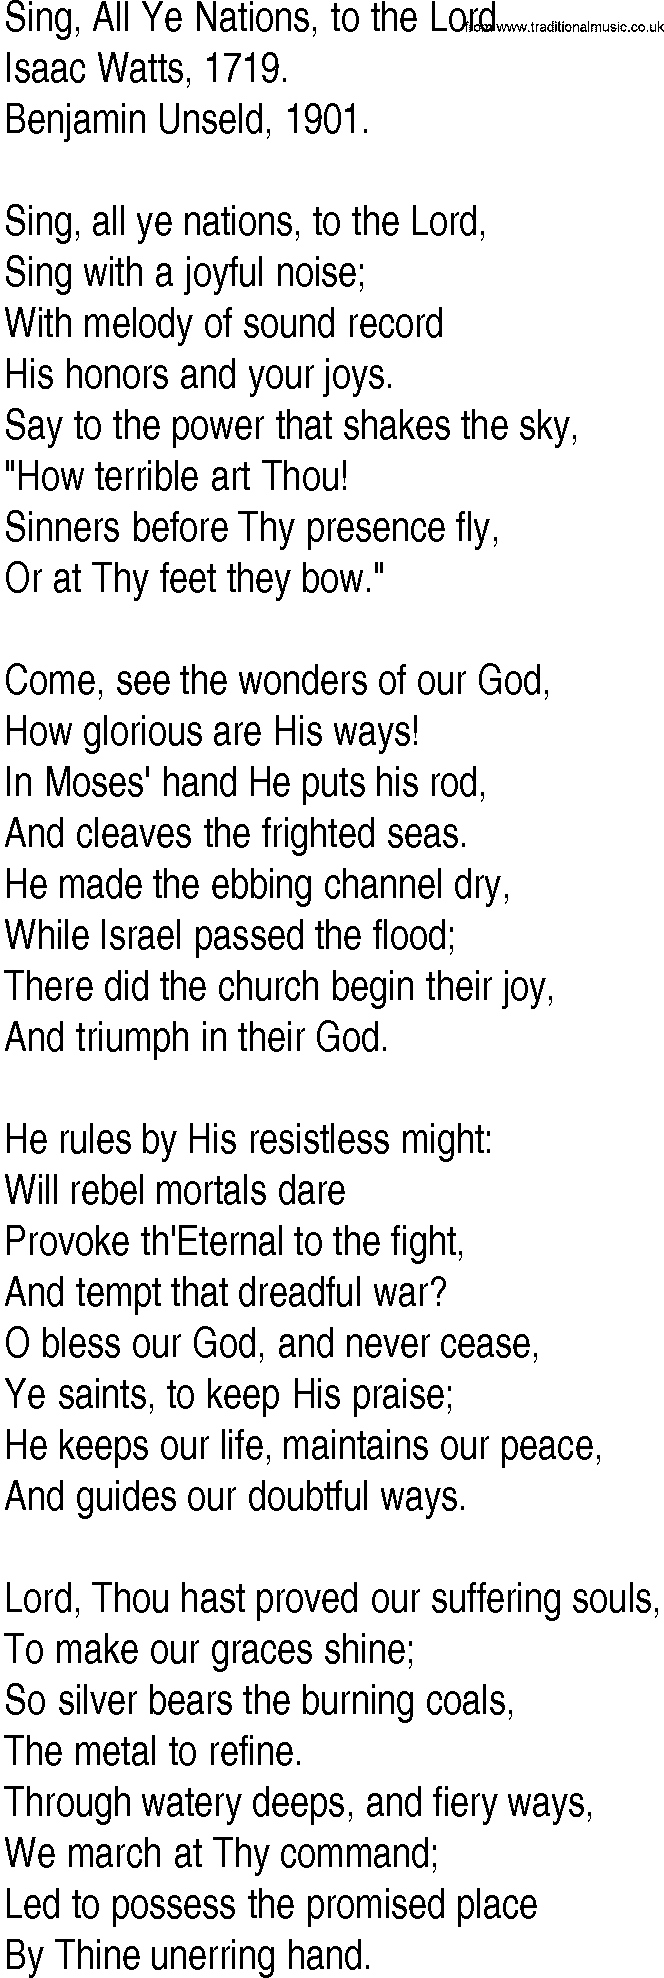 Hymn and Gospel Song: Sing, All Ye Nations, to the Lord by Isaac Watts lyrics